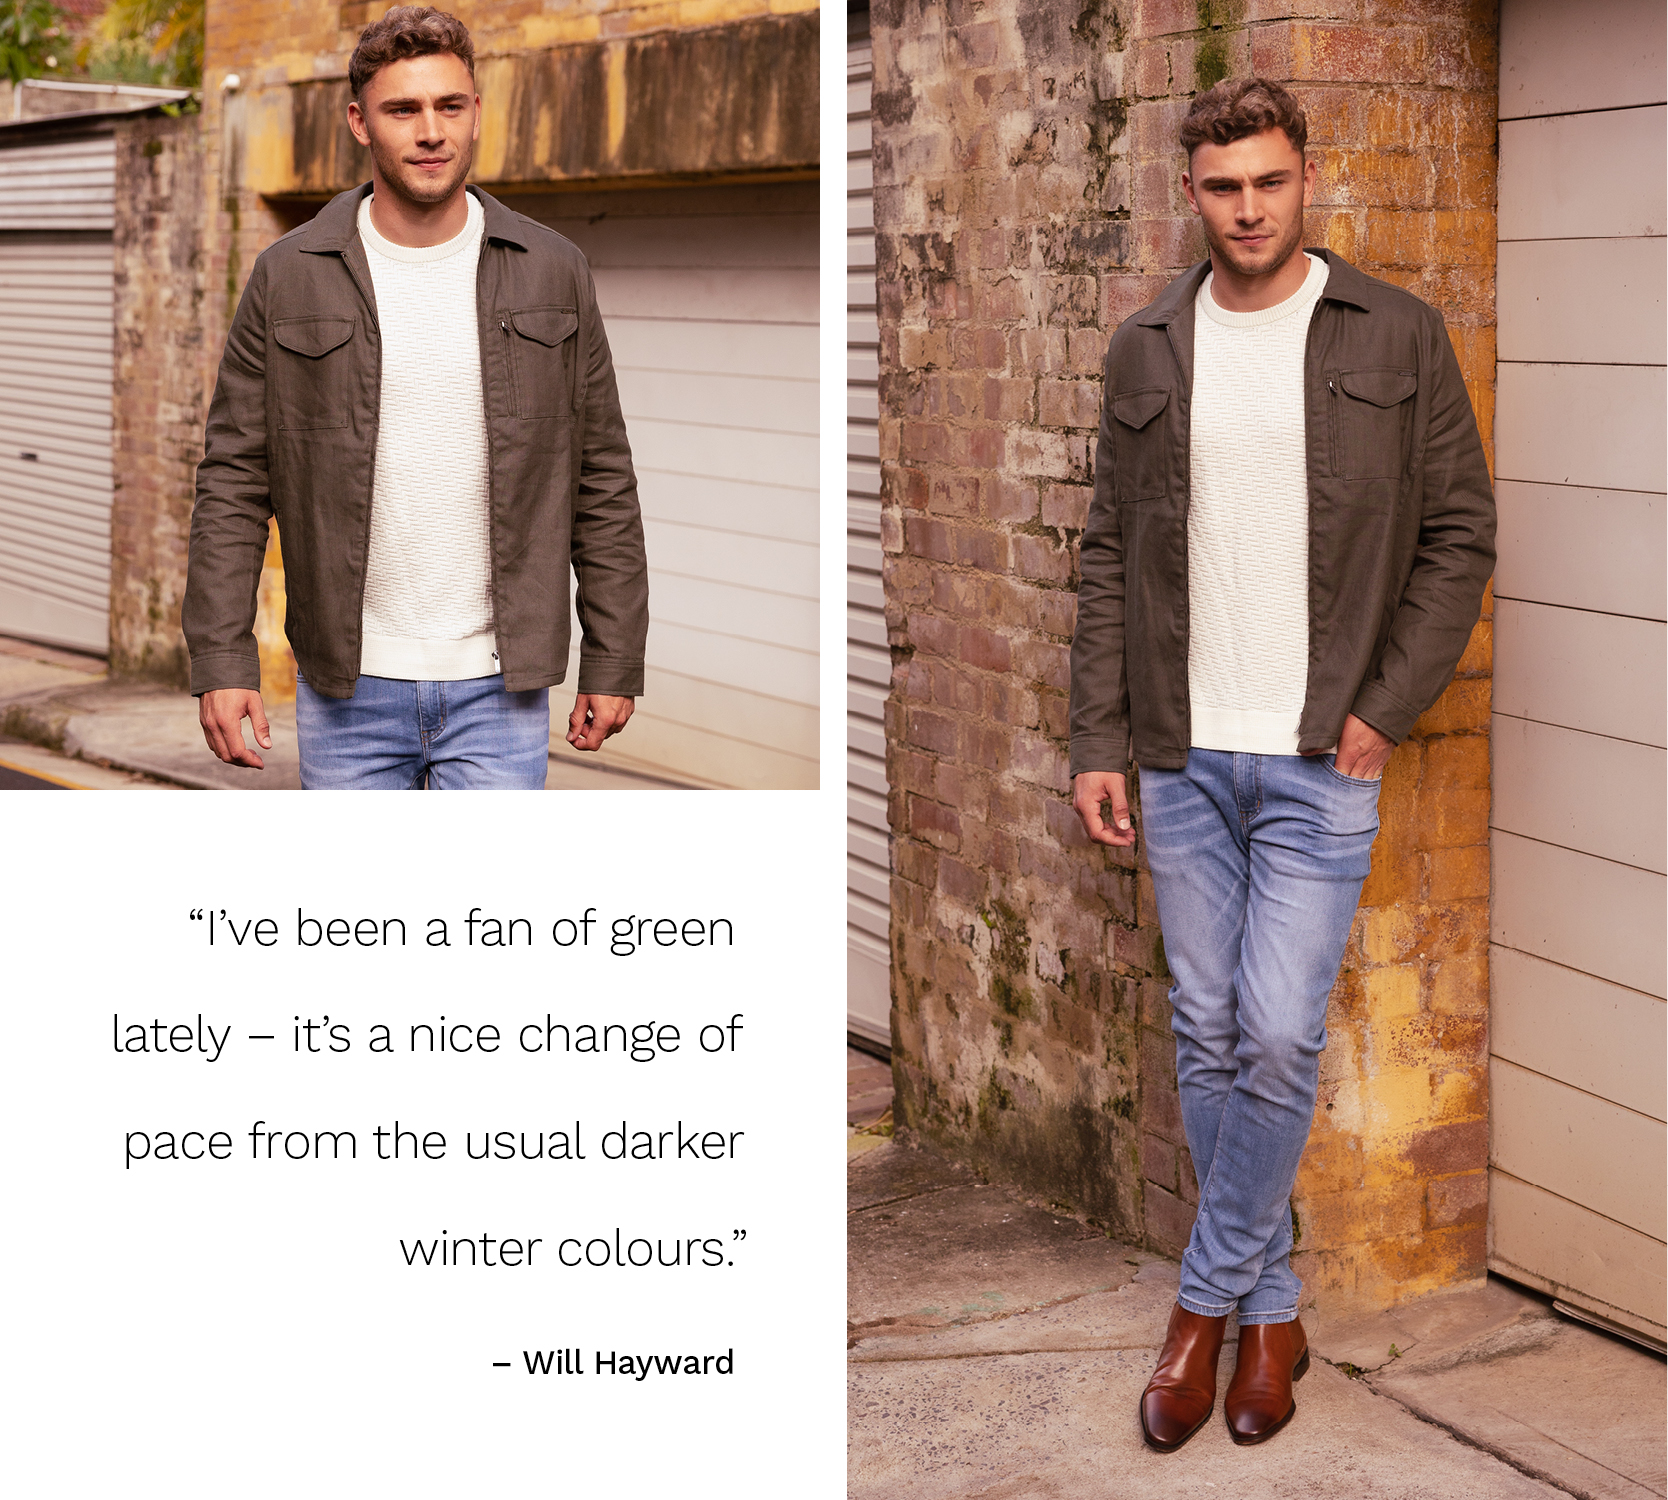 Will Hayward outside wearing white knit, Khaki utility jacket, blue jeans and brown boots